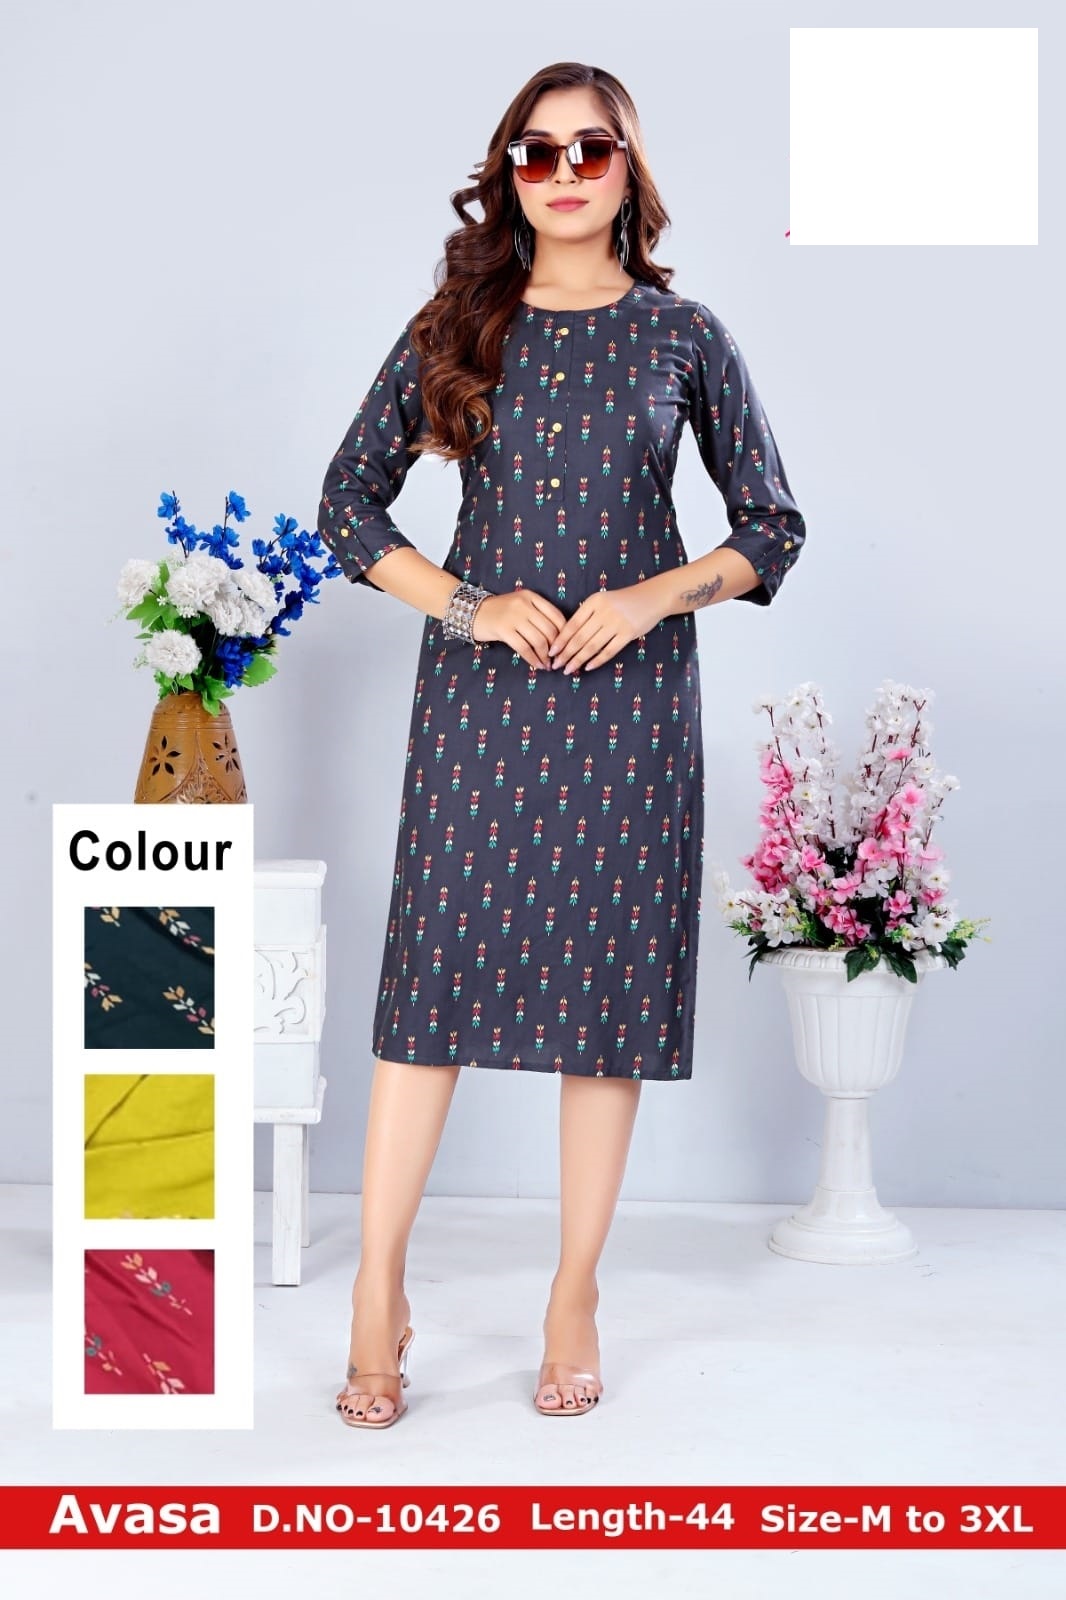 bangalore wholesale branded Kurtis||Avaasa fusion branded||200Rs||single  courier available - YouTube